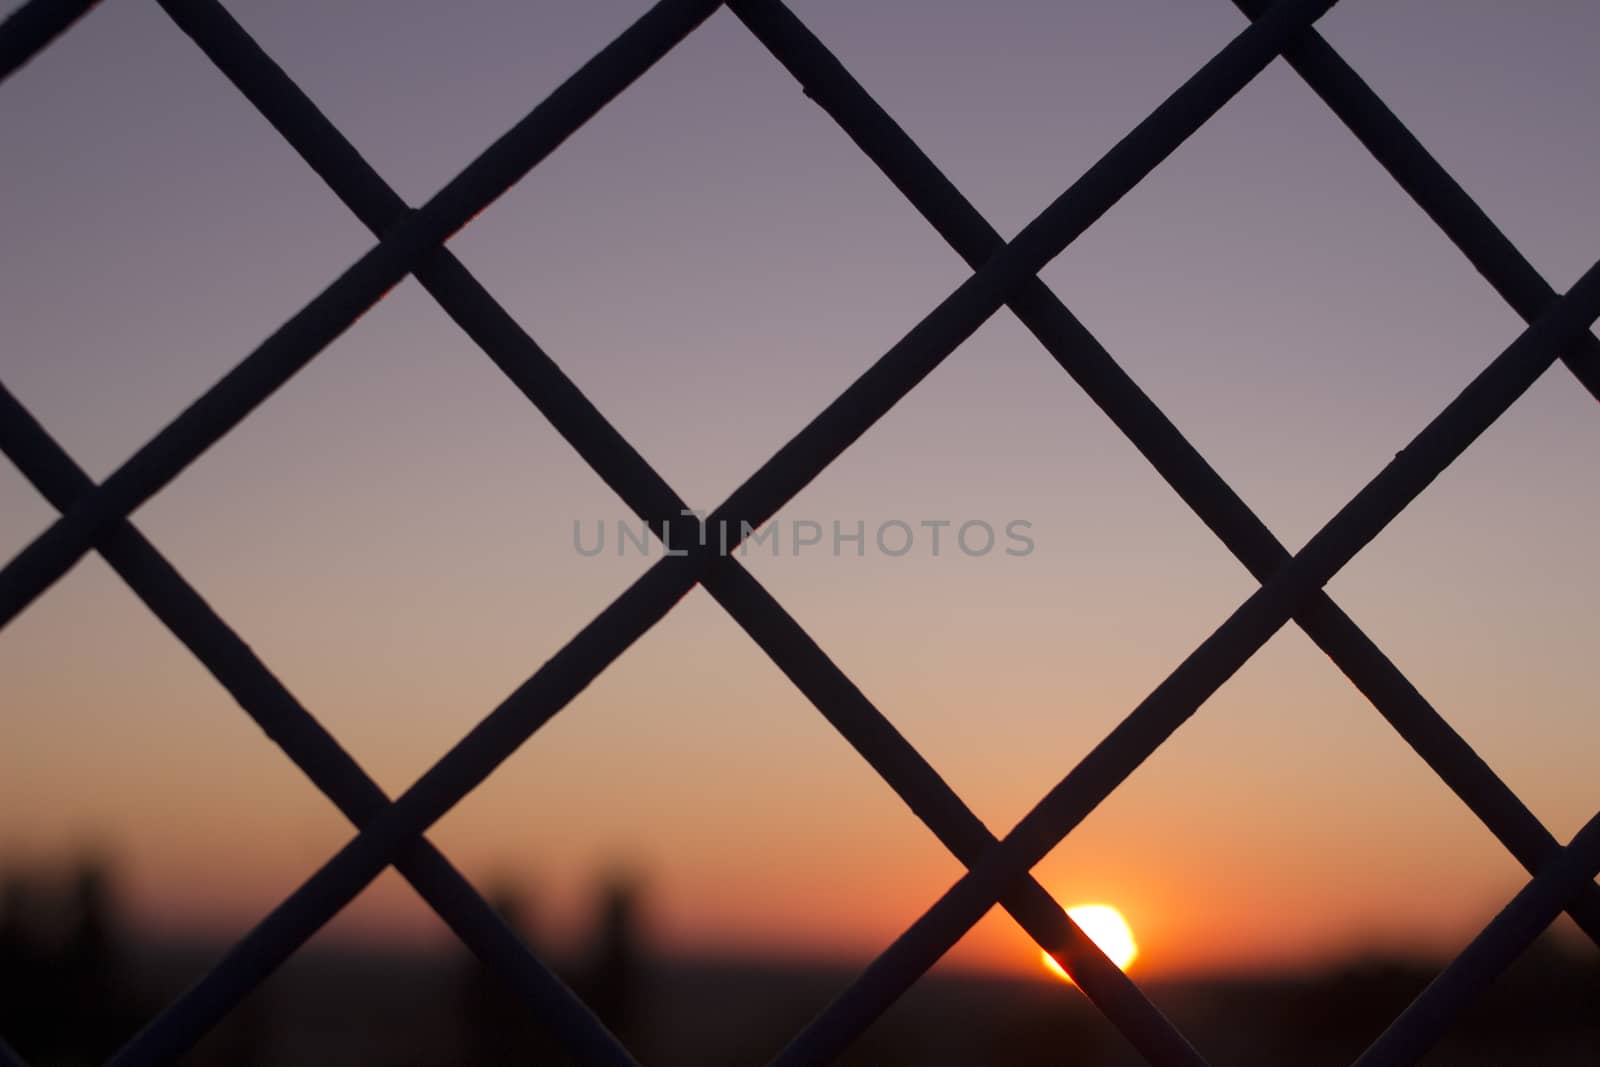 Sunset sun and blue dusk sky through wire mesh fence by edwardolive